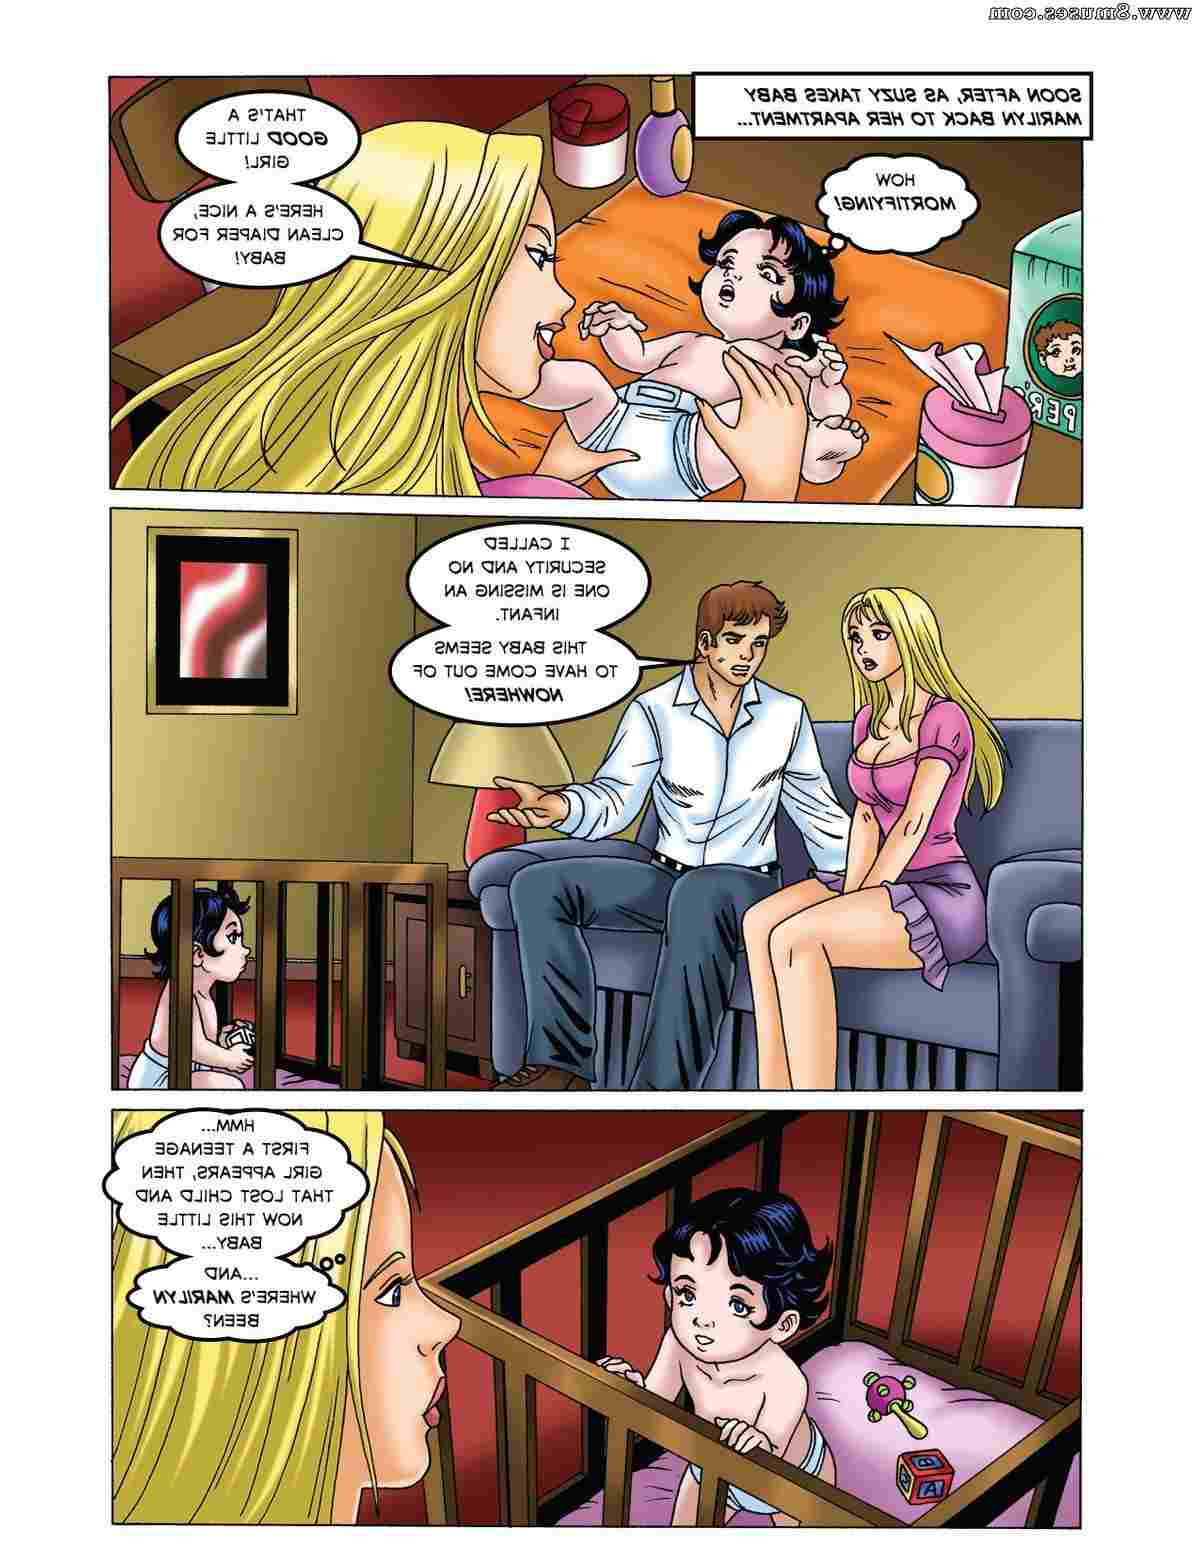 DreamTales-Comics/Crybaby-Marilyn Crybaby_Marilyn__8muses_-_Sex_and_Porn_Comics_29.jpg